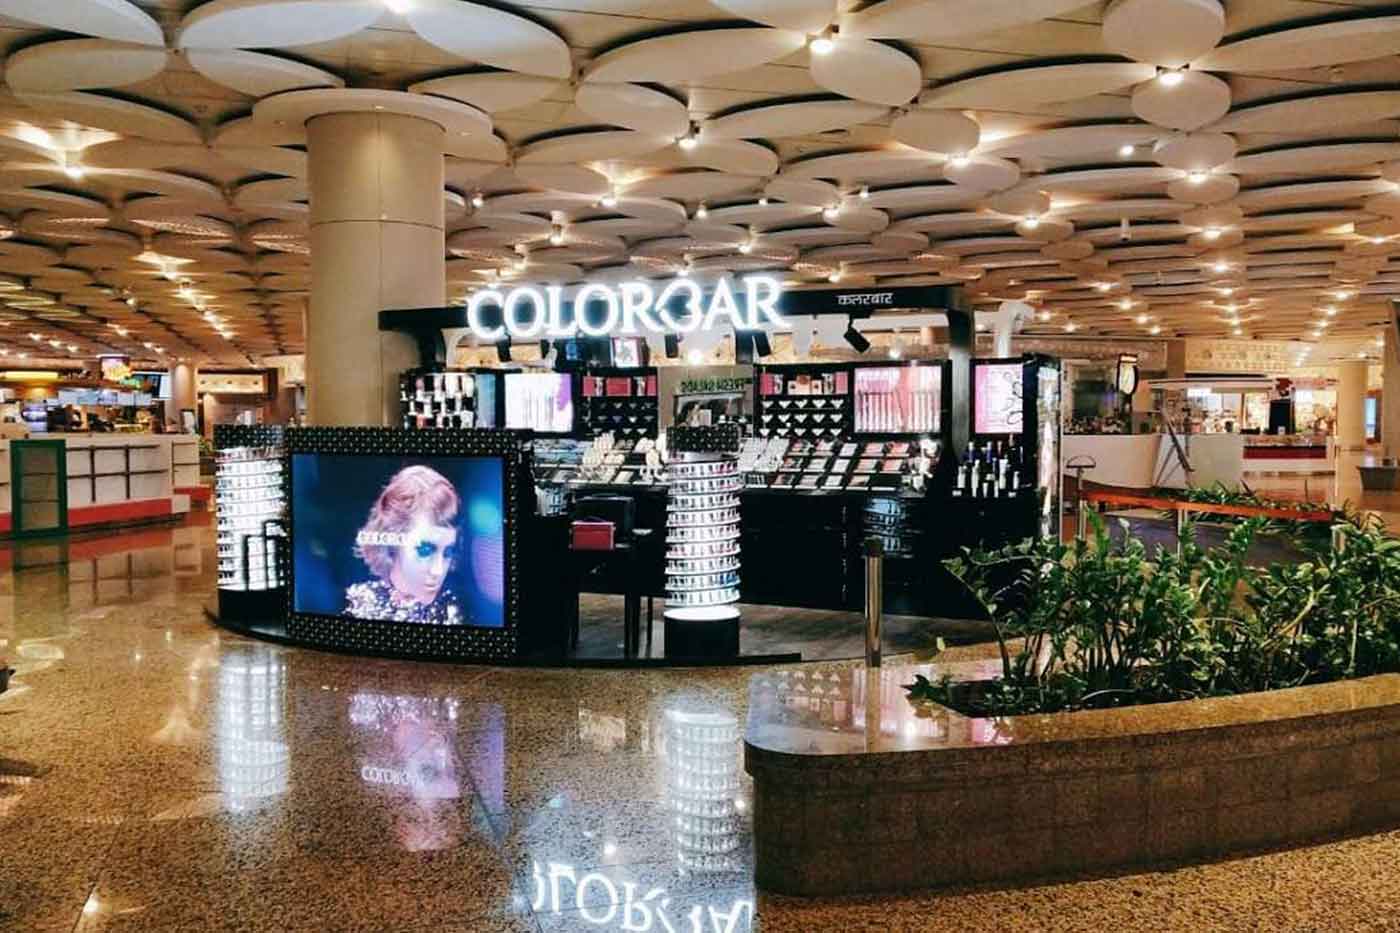 Colorbar to expand its retail presence in North-India